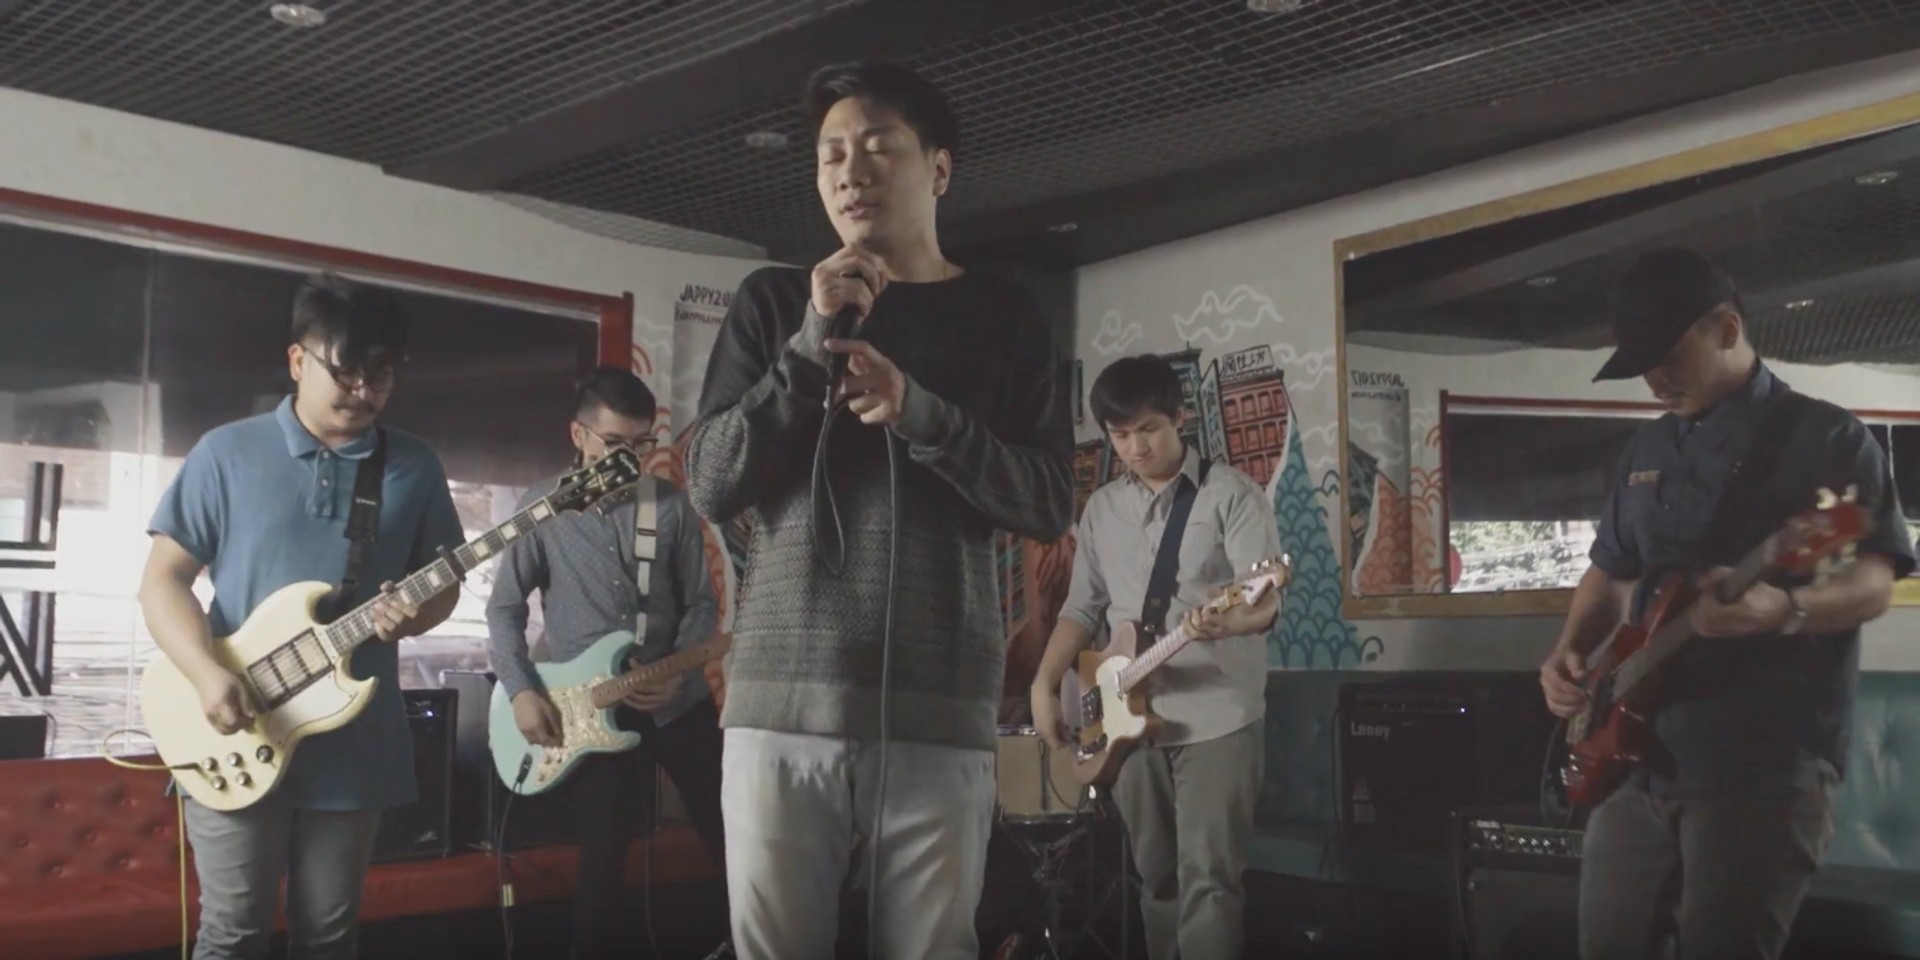 Lions and Acrobats release new music video, Cloud – watch